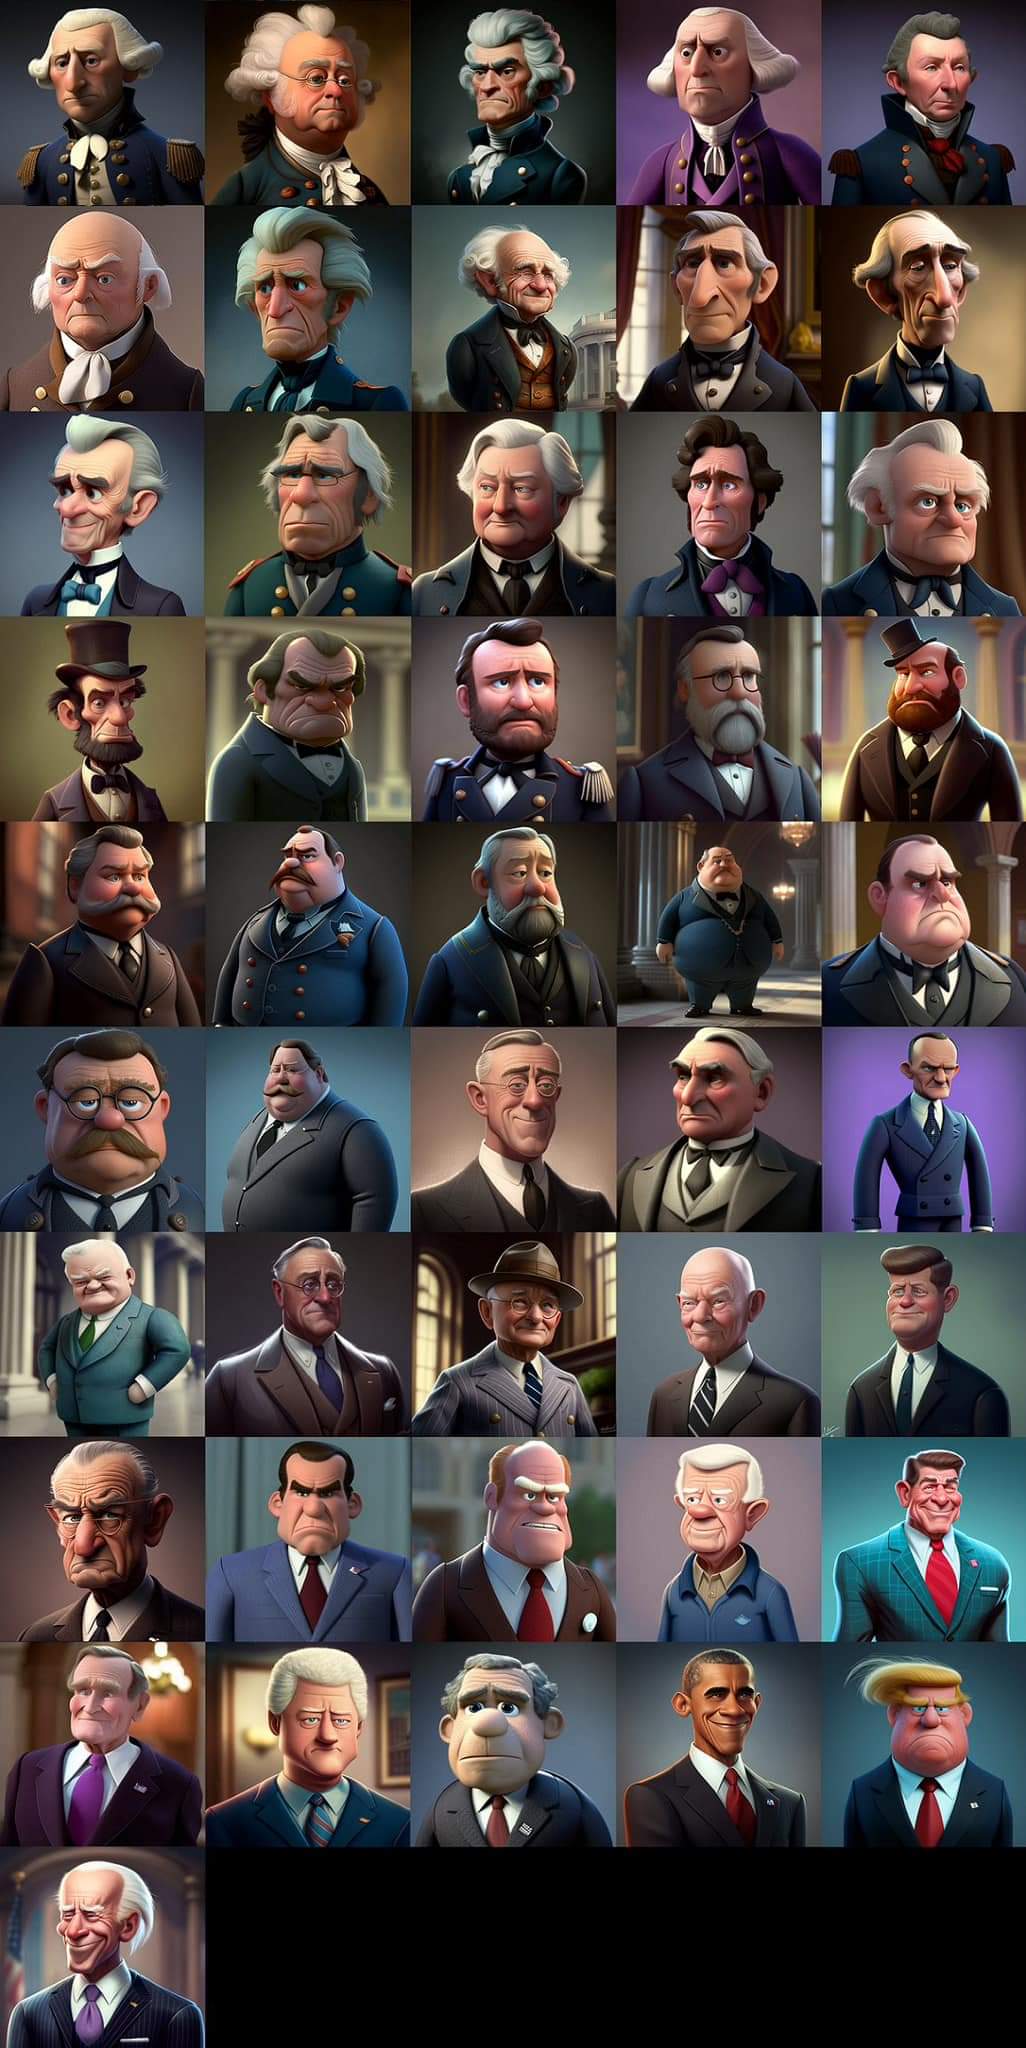 They are all rendered in a style reminiscent
of Pixar films